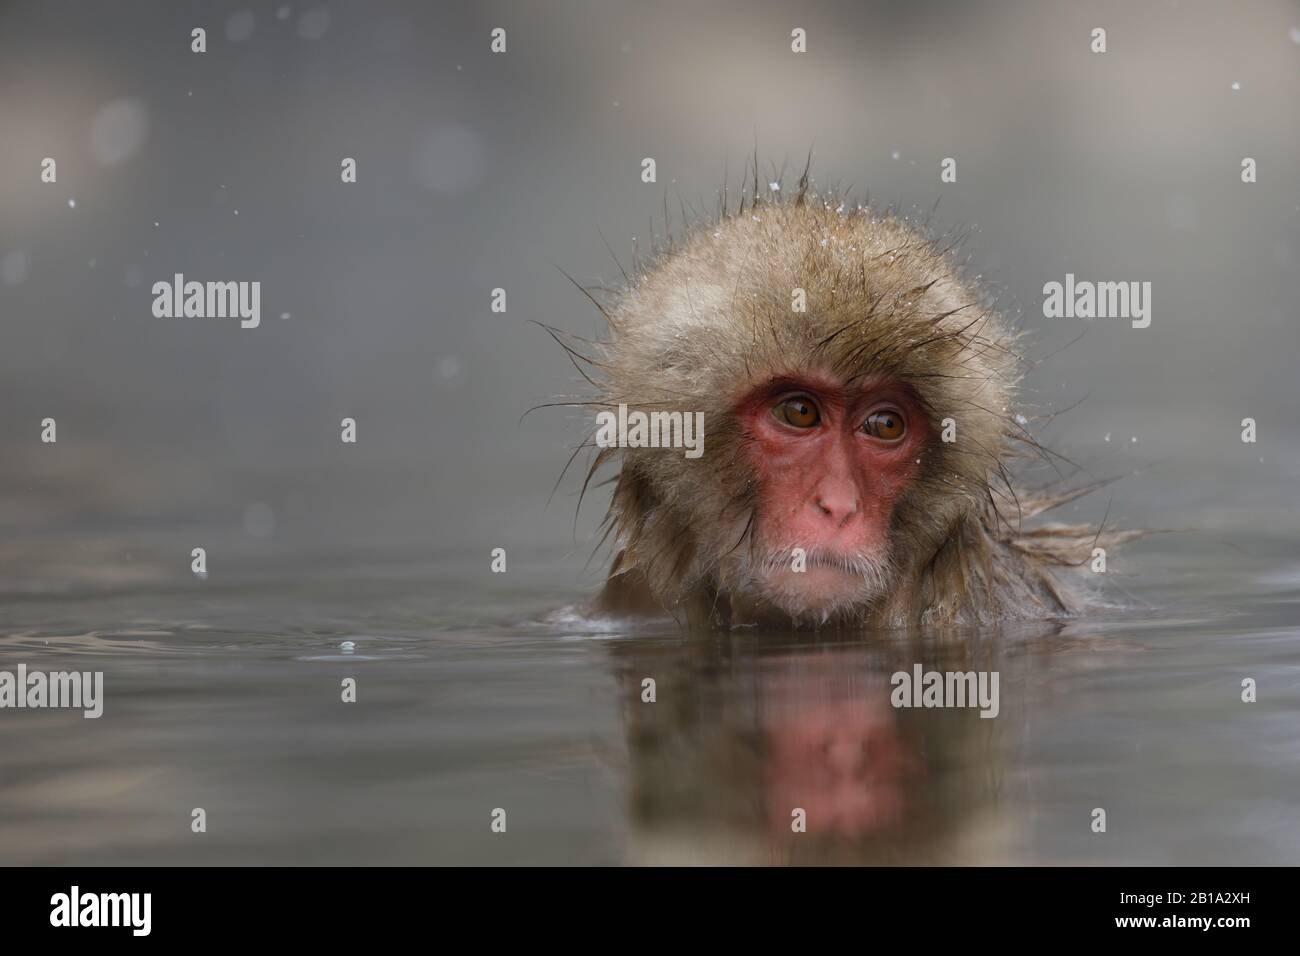 A Japanese macaque enjoys a hot spring.Jigokudani Yaen-koen was opened in 1964 and it’s known to be the only place in the world where monkeys bathe in hot springs. The Jigokudani Yaen-koen (altitude 850 meters) is located in the Valley of Yokoyu River sourced from Shiga-Kogen of the Joshinetsu-Kogen National Park in northern part of Nagano prefecture. Stock Photo